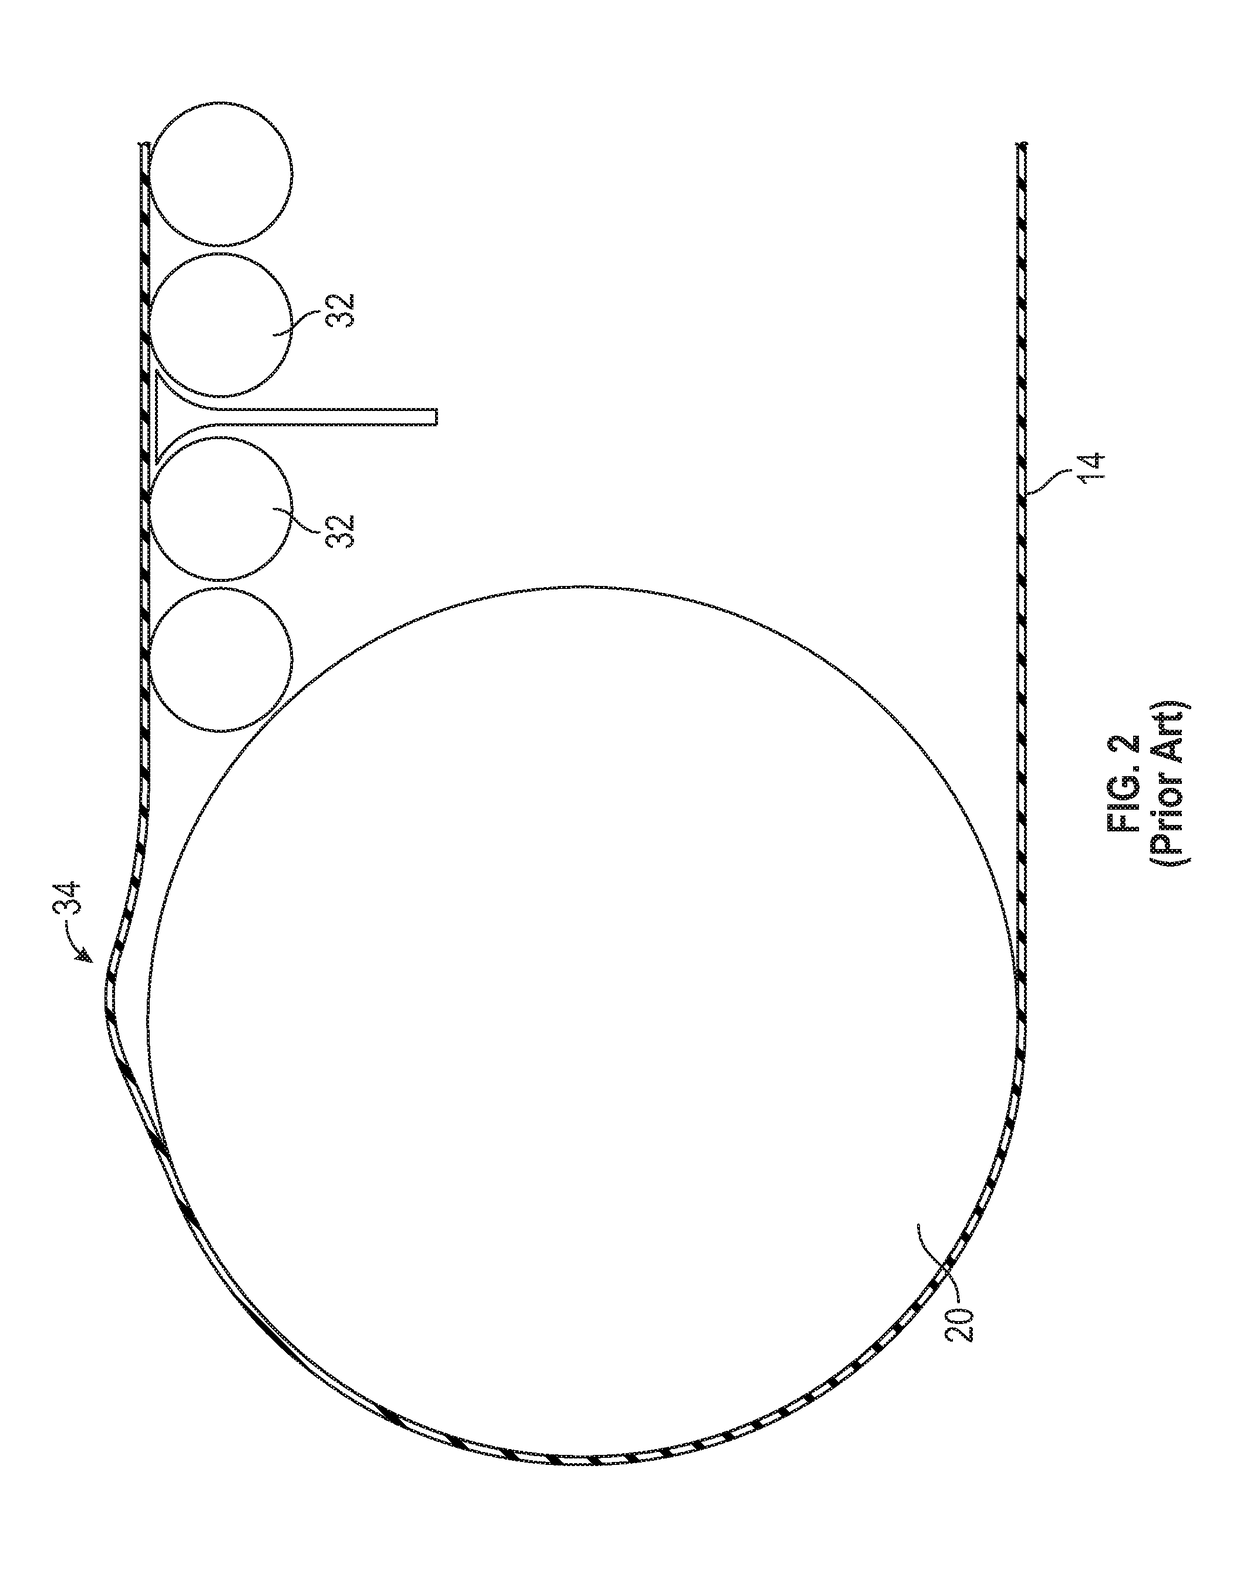 System and method for continuous casting